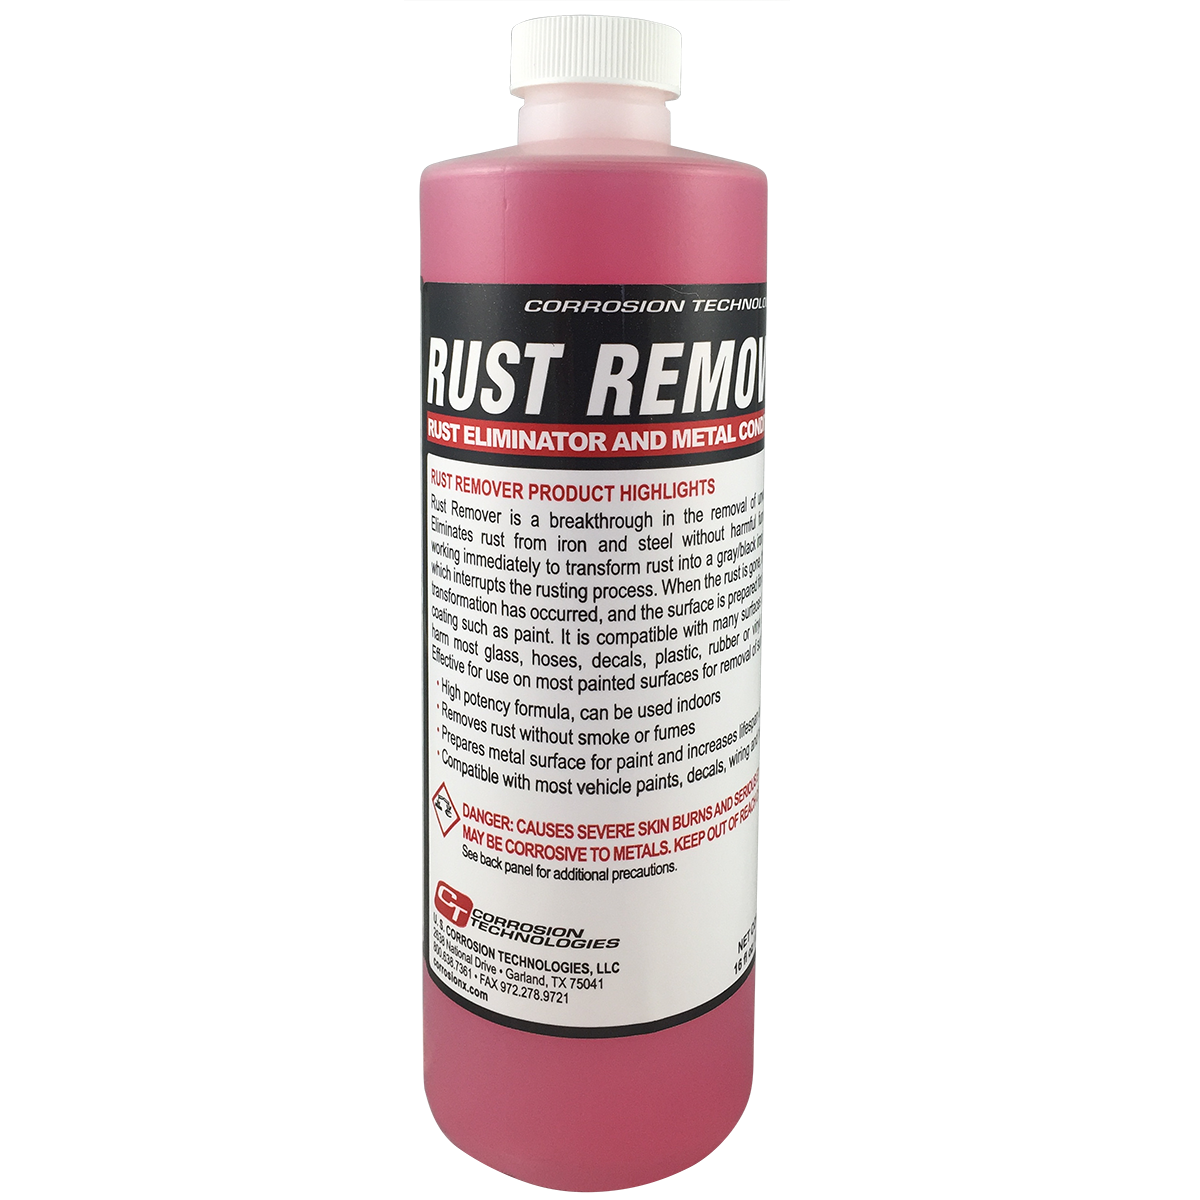 SPARDIANT Iron Slayer Car Rust Fallout Remover & Inhibitor Spray – Helps  with Rust Prevention & Protection – Rust Cleaner Products - Remove Iron  Particles in Car Paint, Motorcycle, RV & Boat 16 Oz